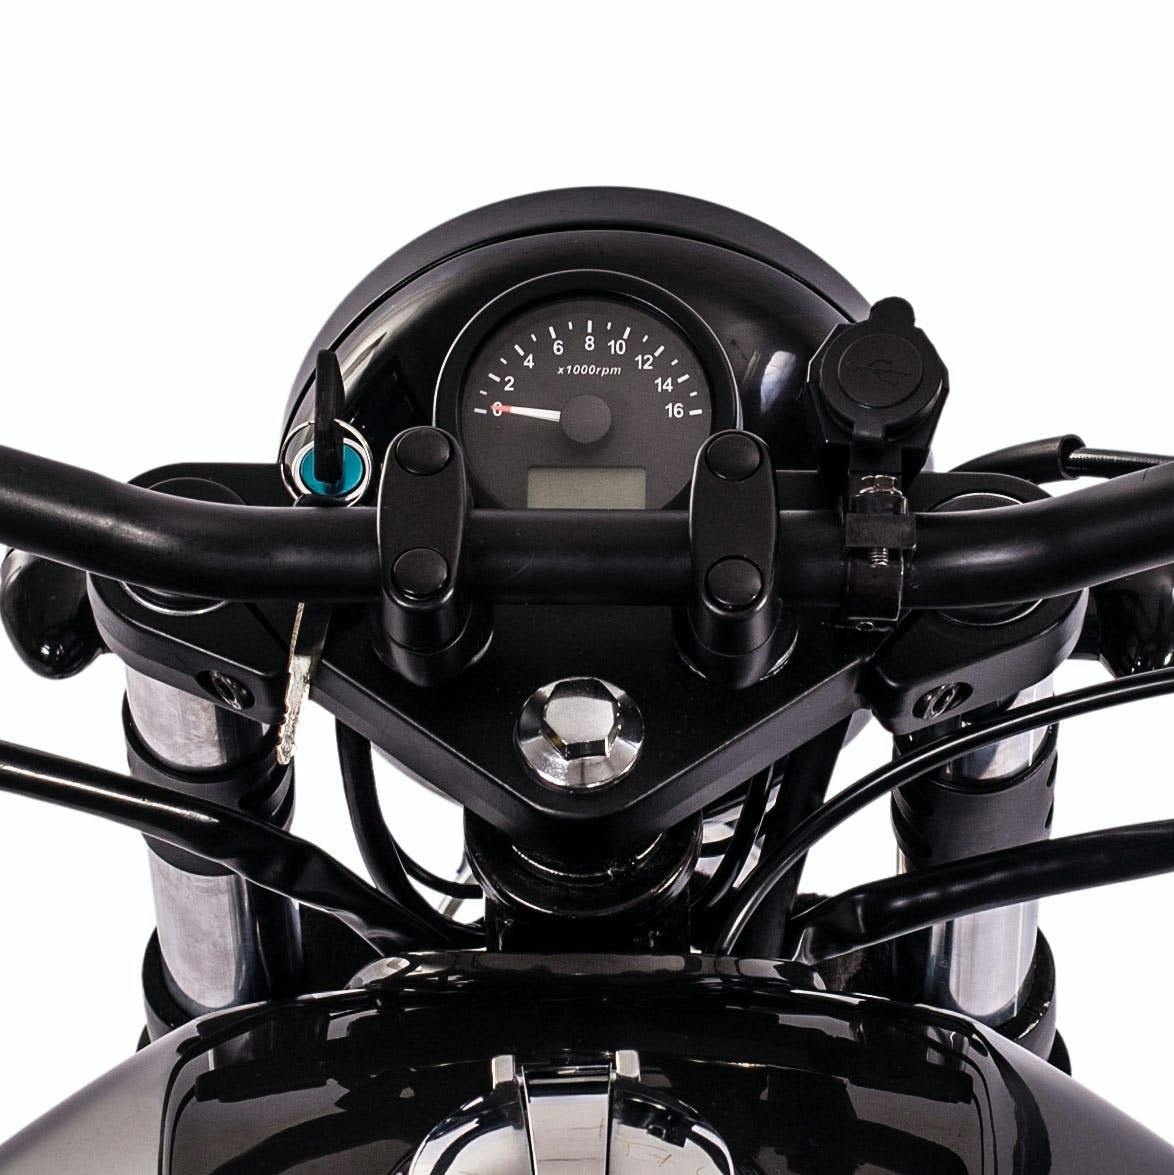 Close-up of the speedometer and display of the Cromwell 125